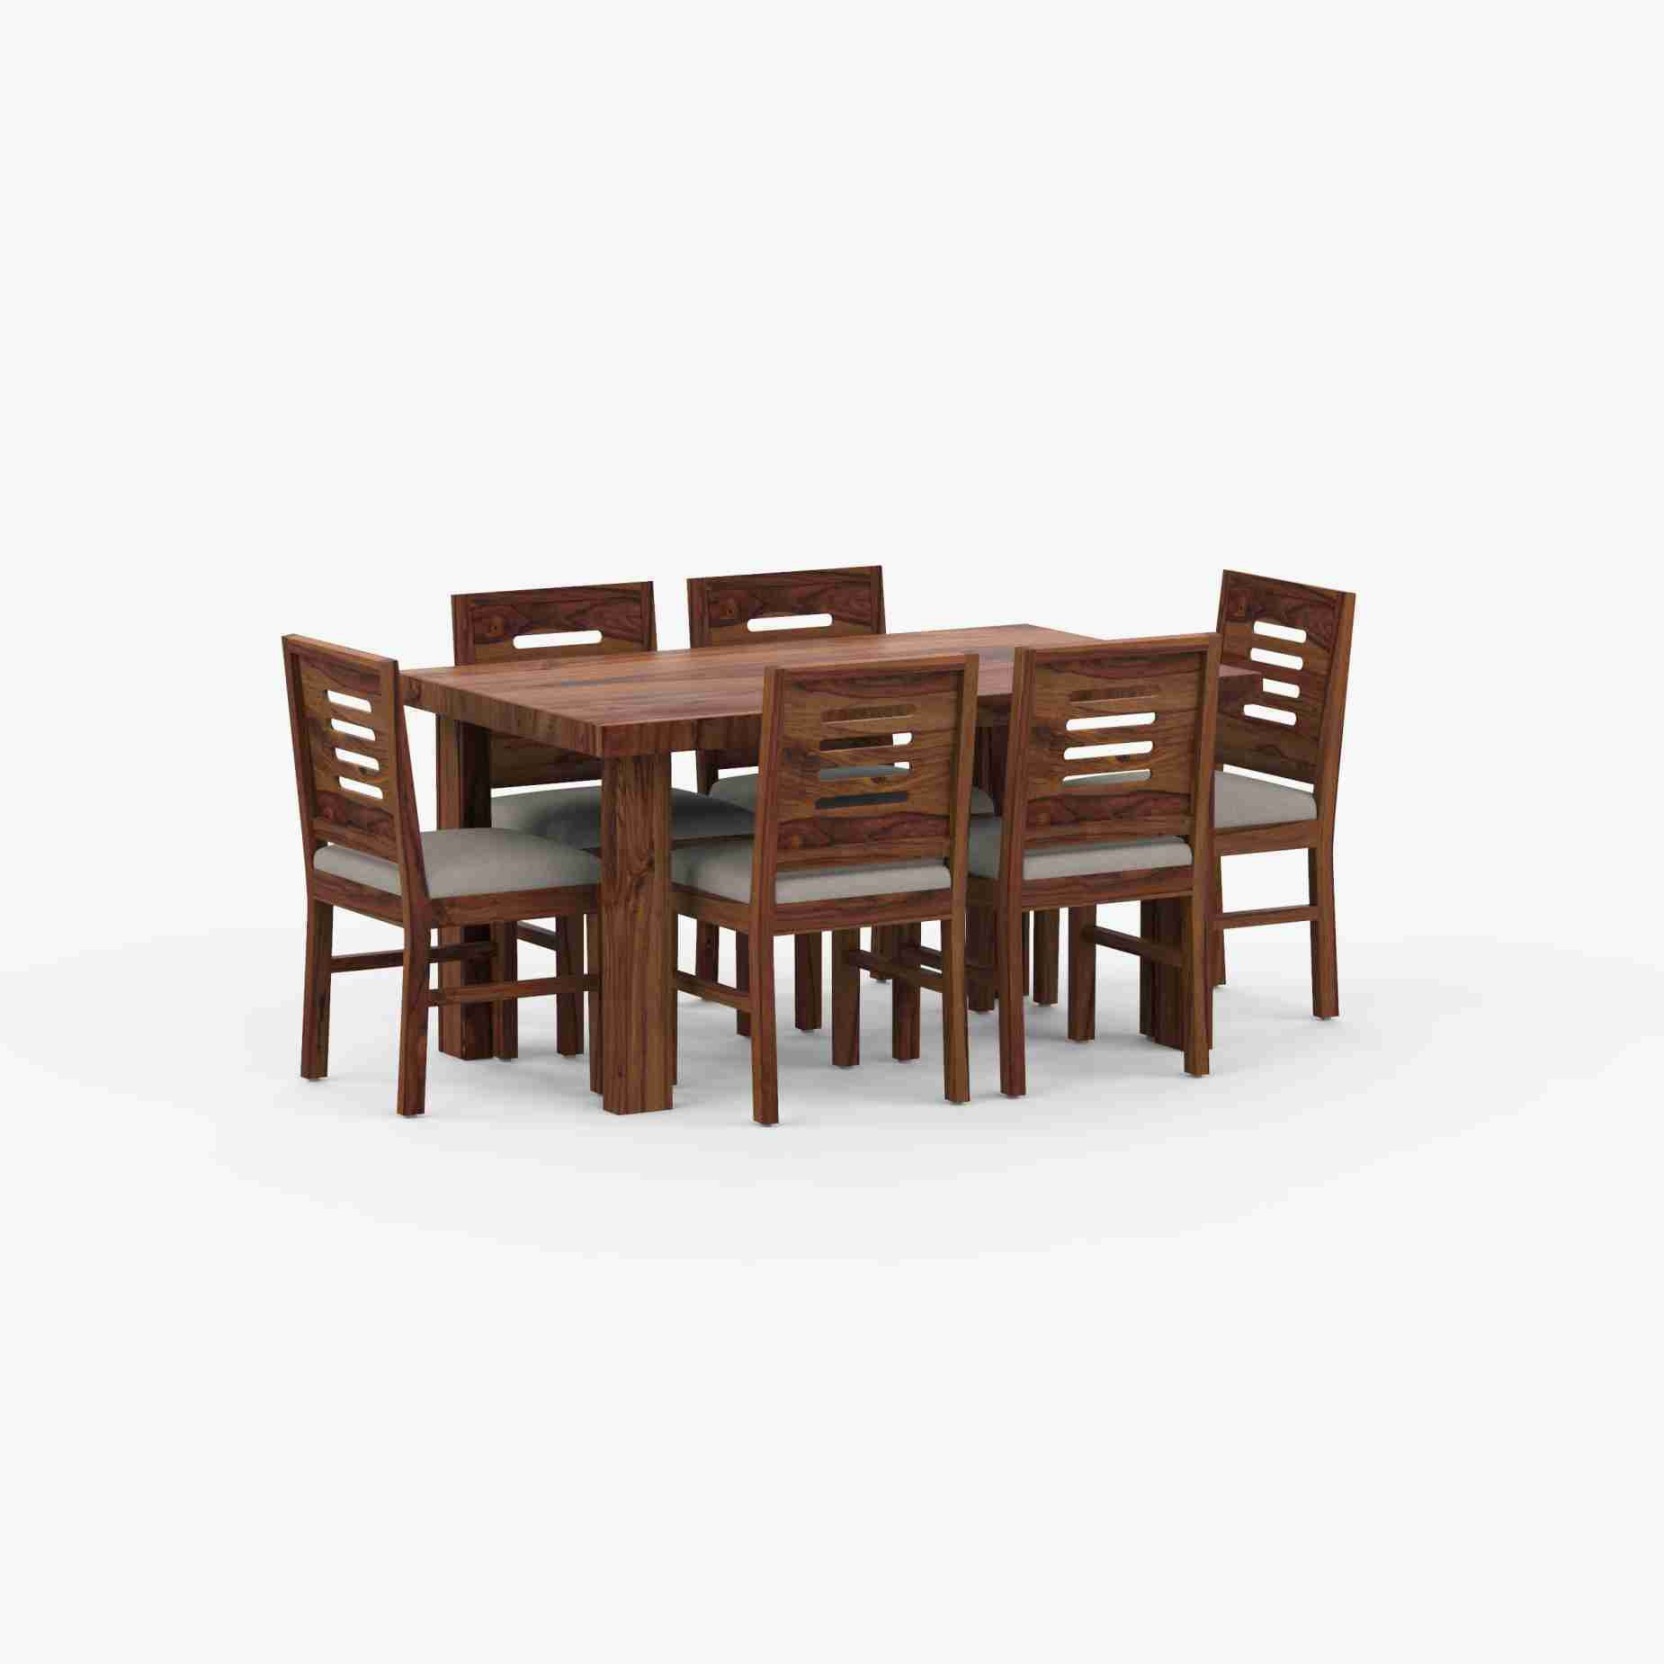 Aaram By Zebrs Dining Table With 6 Chairs For Dining Room Solid Wood 6 Seater Dining Set (Finish Color -Provincial Teak, DIY(Do-It-Yourself))